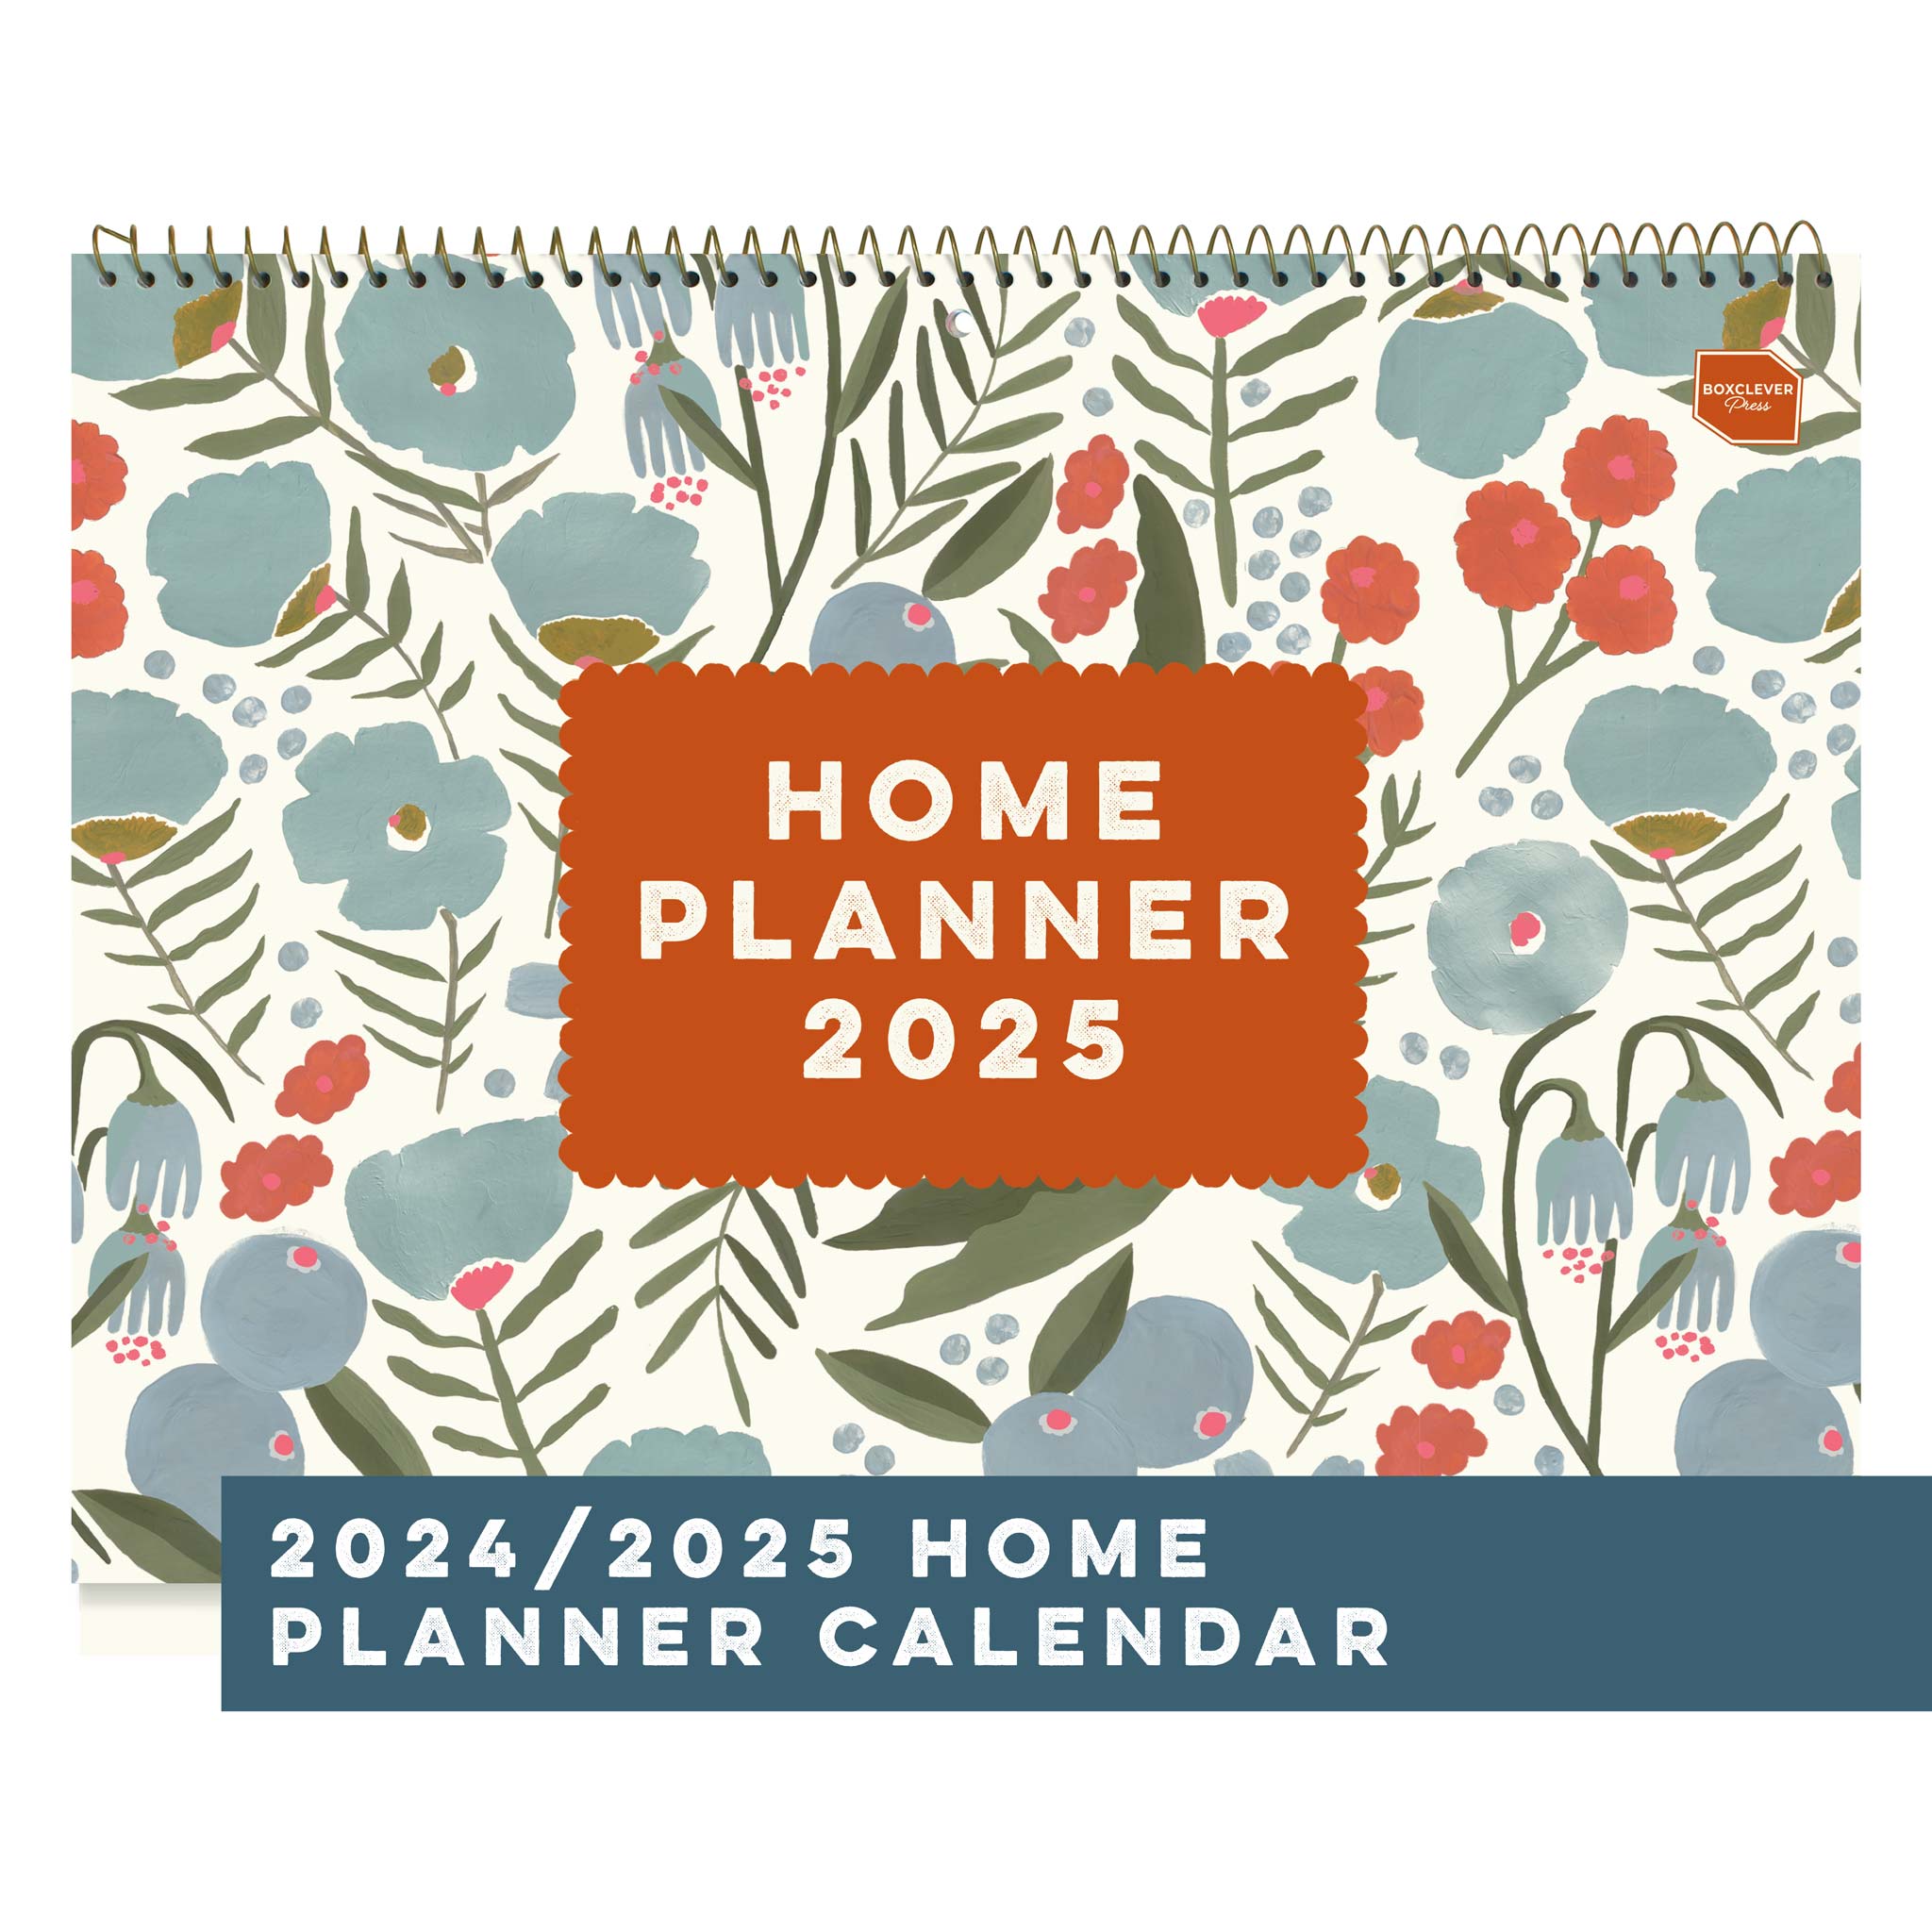 An image of Home Planner 2025